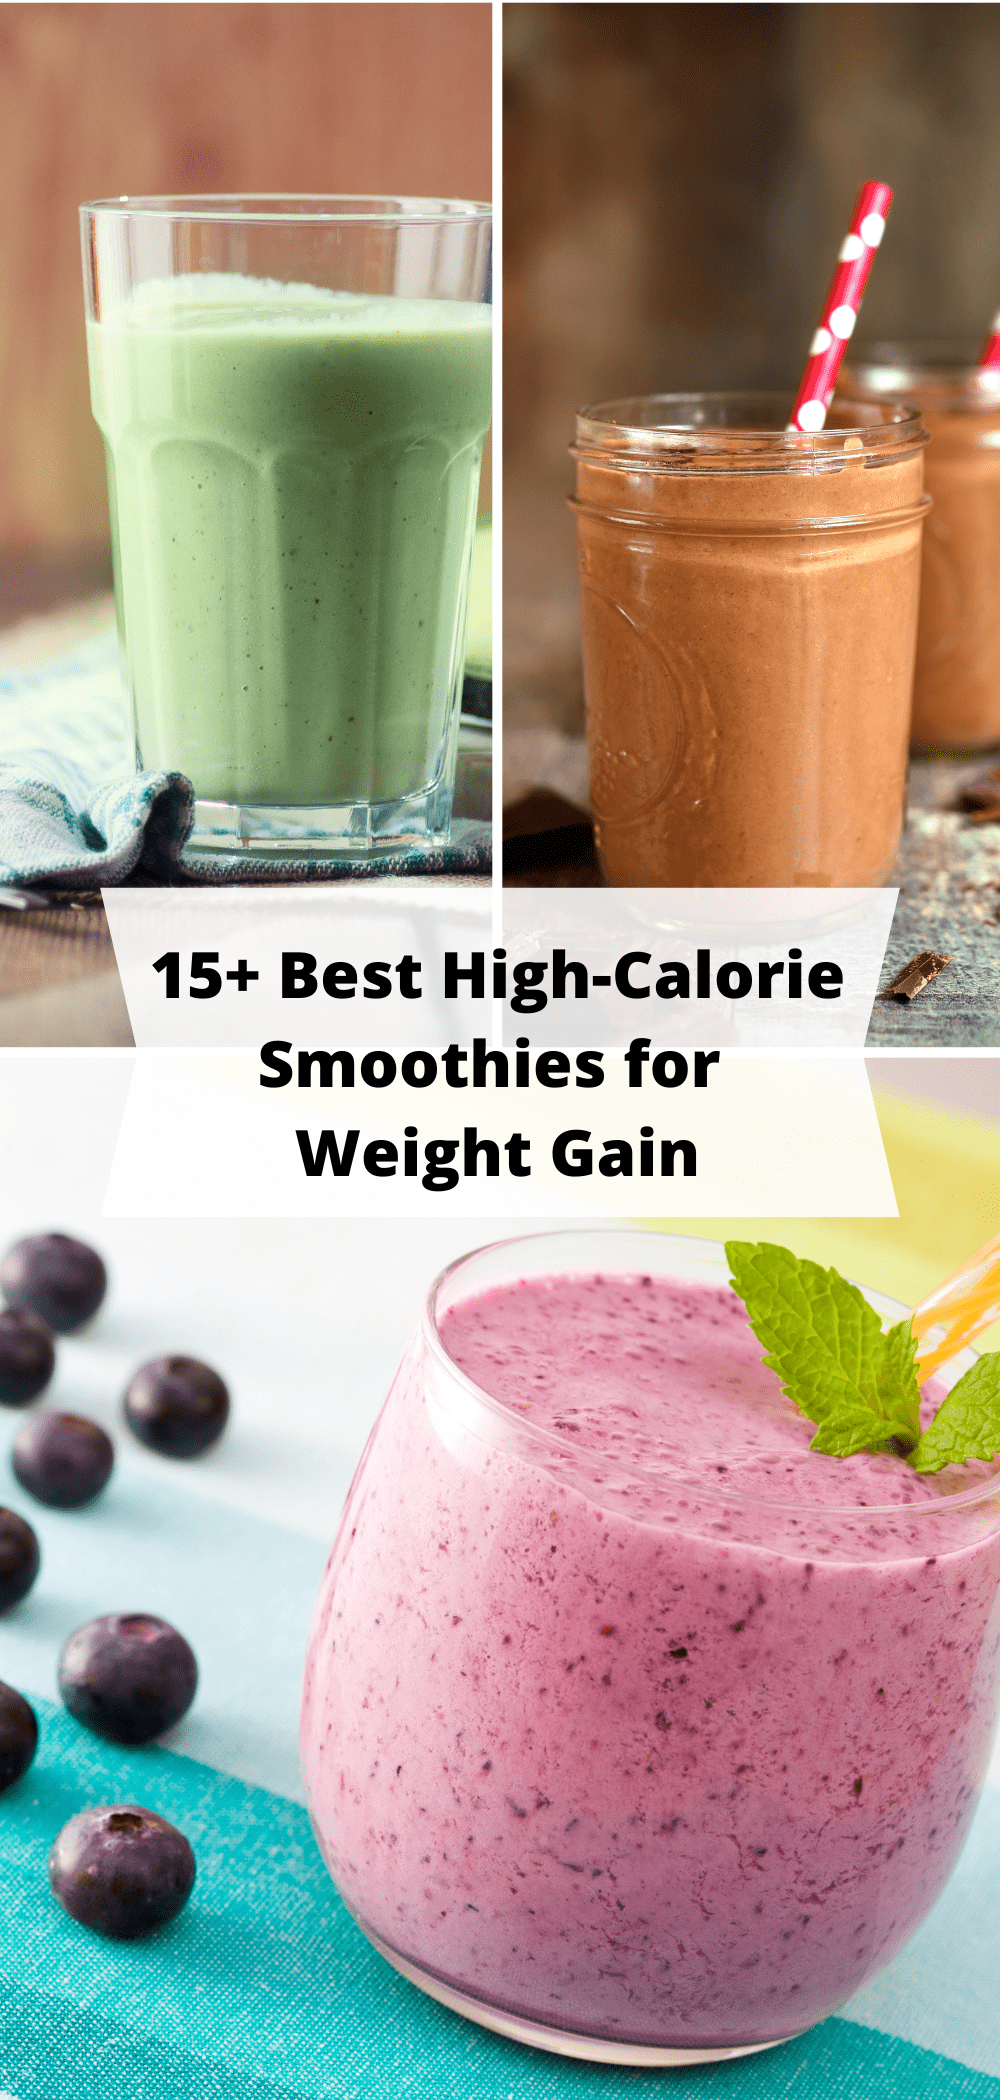 3 different colored smoothies ready to drink for best high-calorie weight gain smoothies.